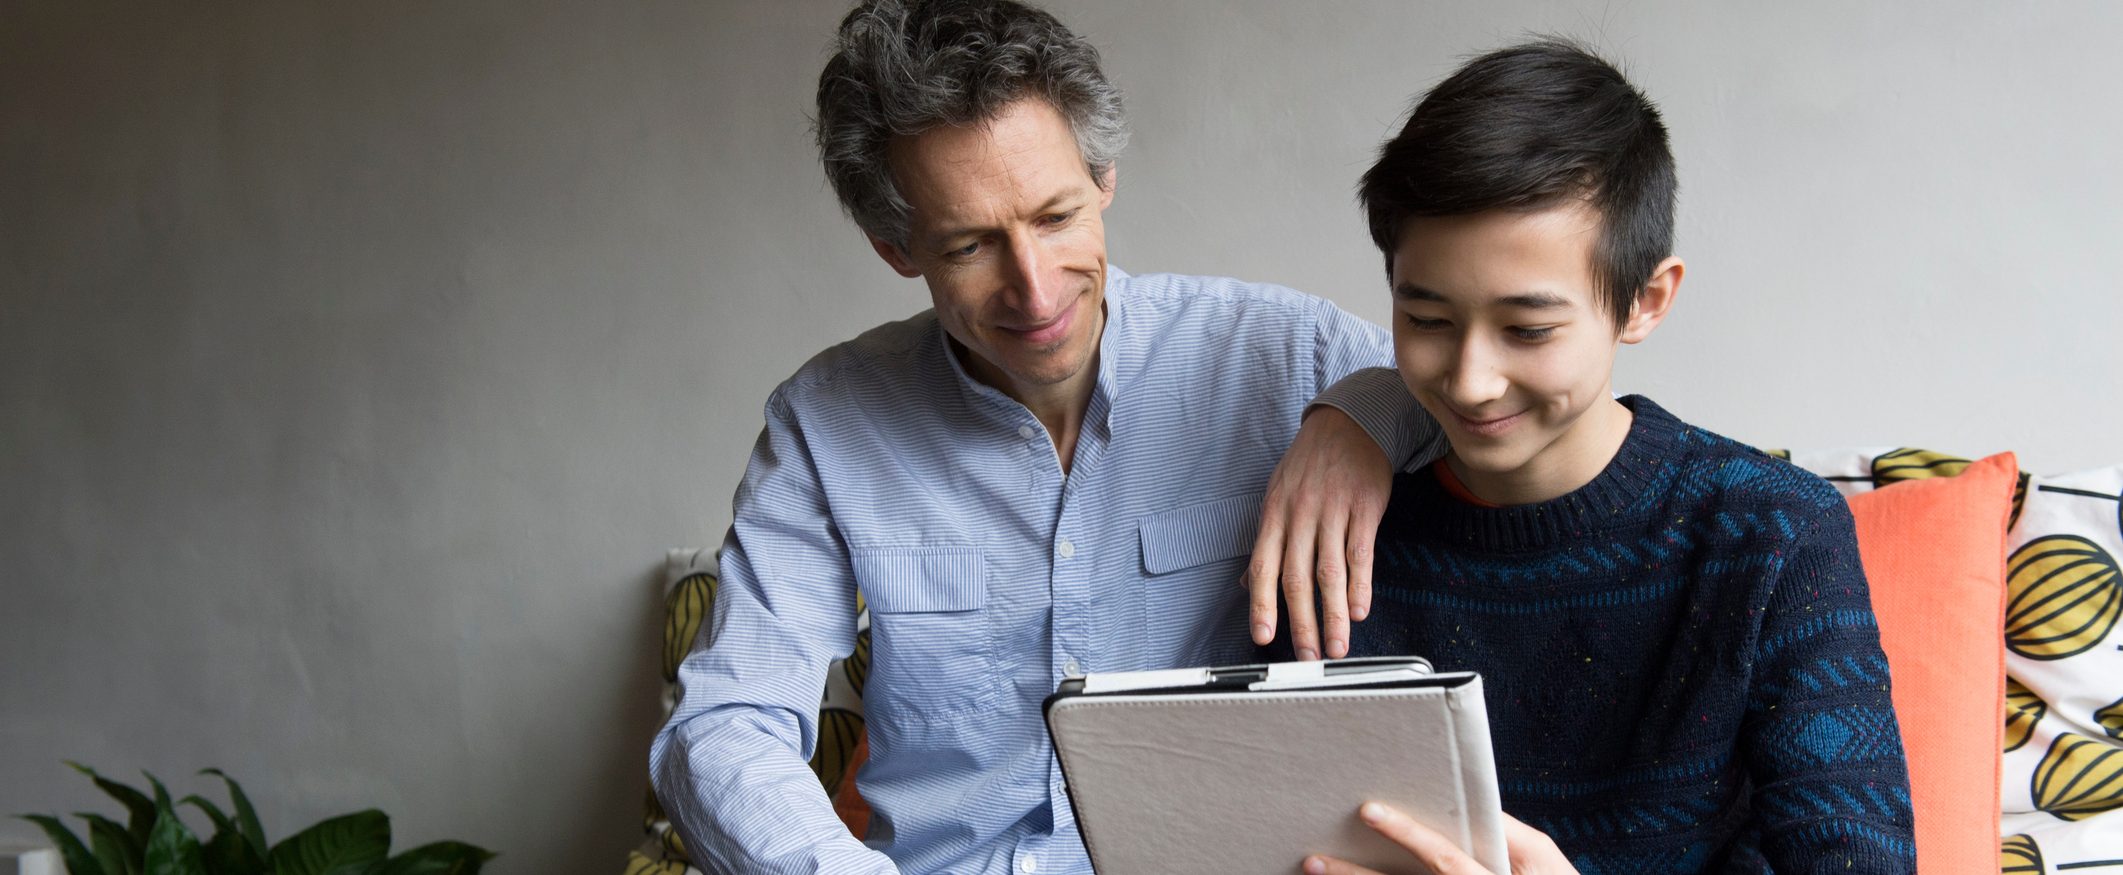 A dad and son sit together while the son works on a tablet. The dad rests his arm on his son’s shoulder.